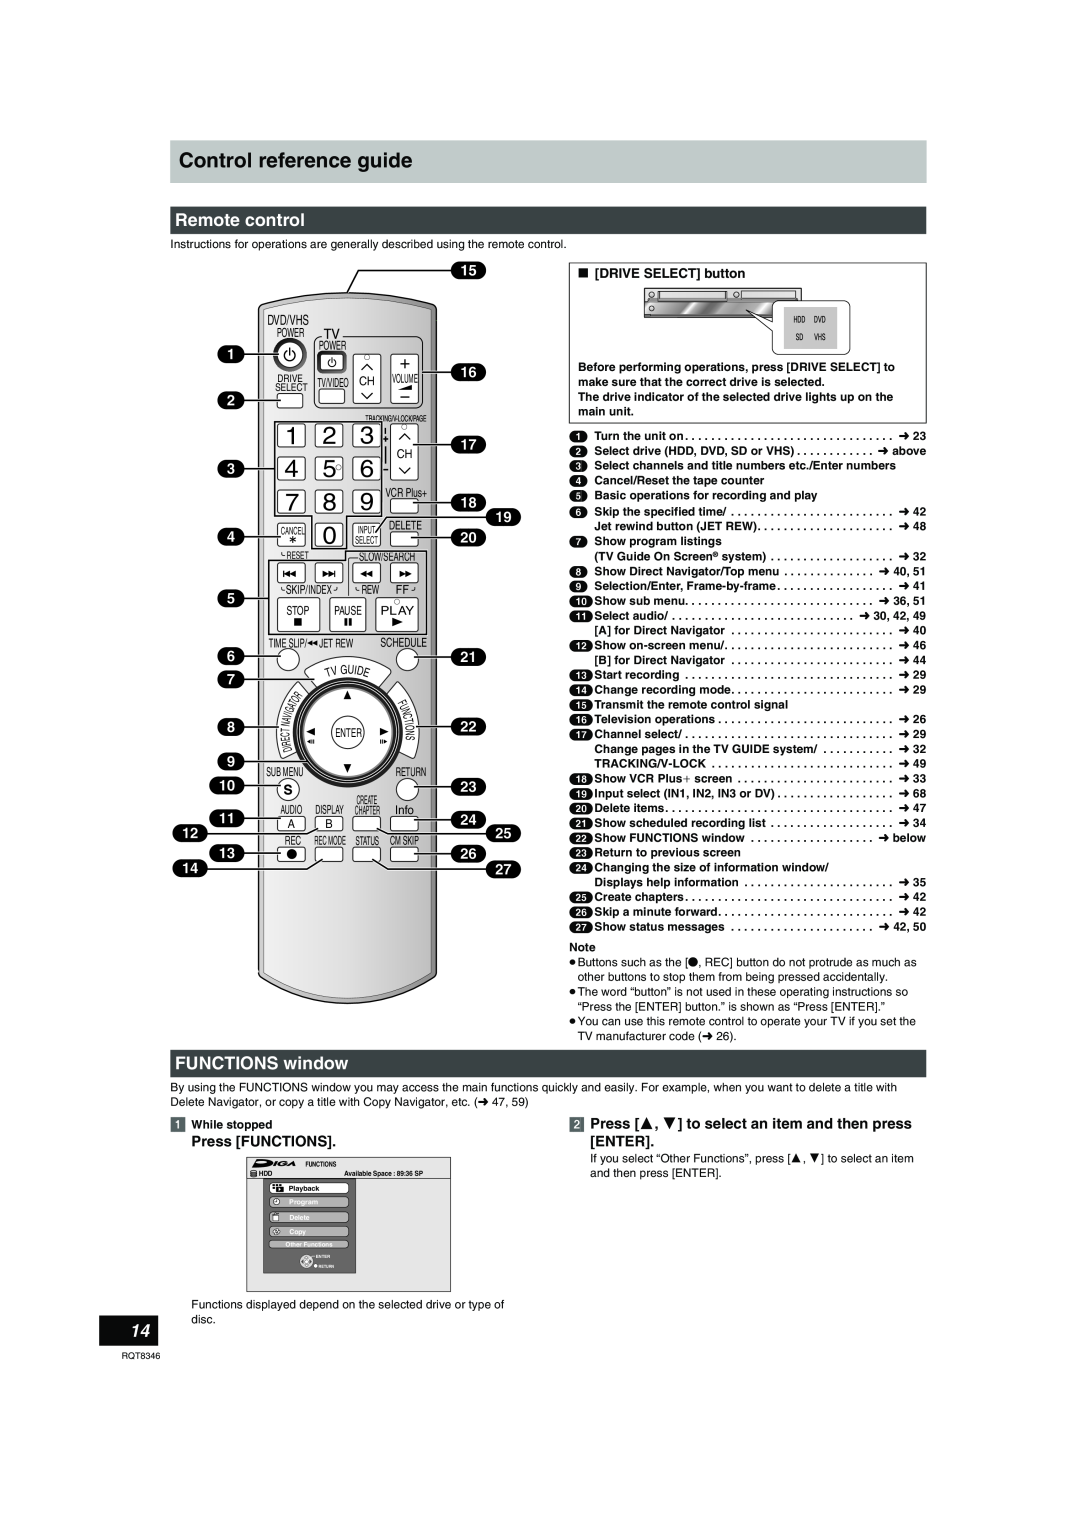 Panasonic DMR-EH75V Control reference guide, Remote control, FUNCTIONS window, Press FUNCTIONS, ∫ DRIVE SELECT button 